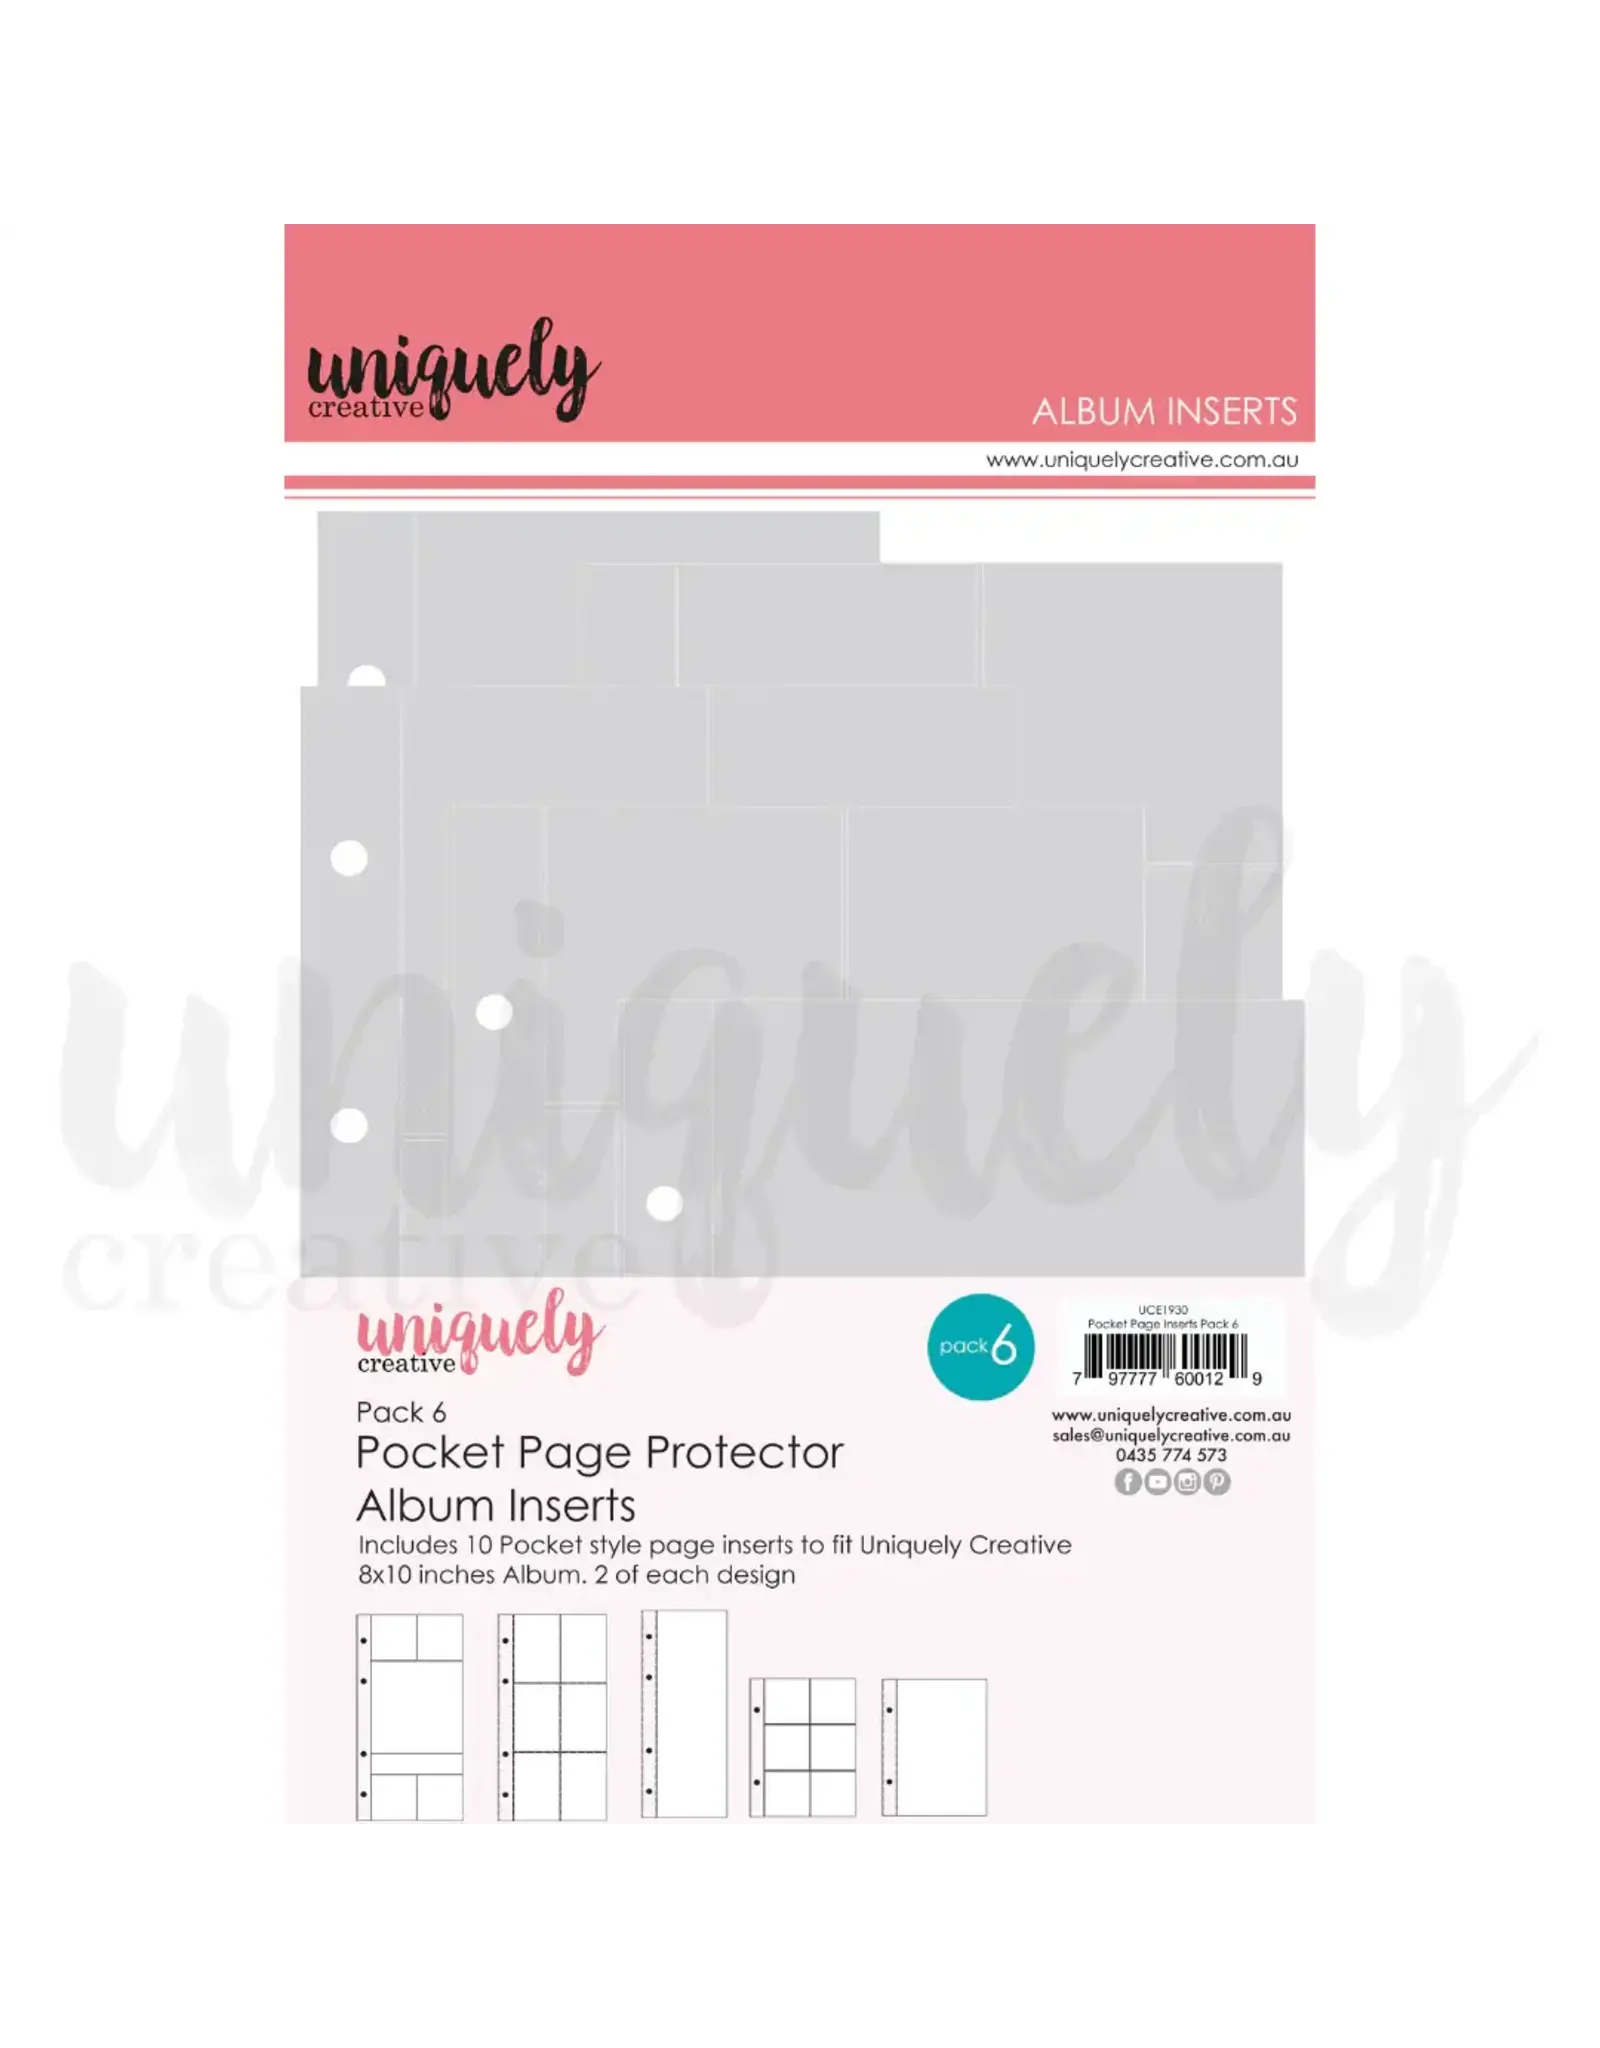 UNIQUELY CREATIVE PACK 6 POCKET PAGE PROTECTOR ALBUM INSERTS